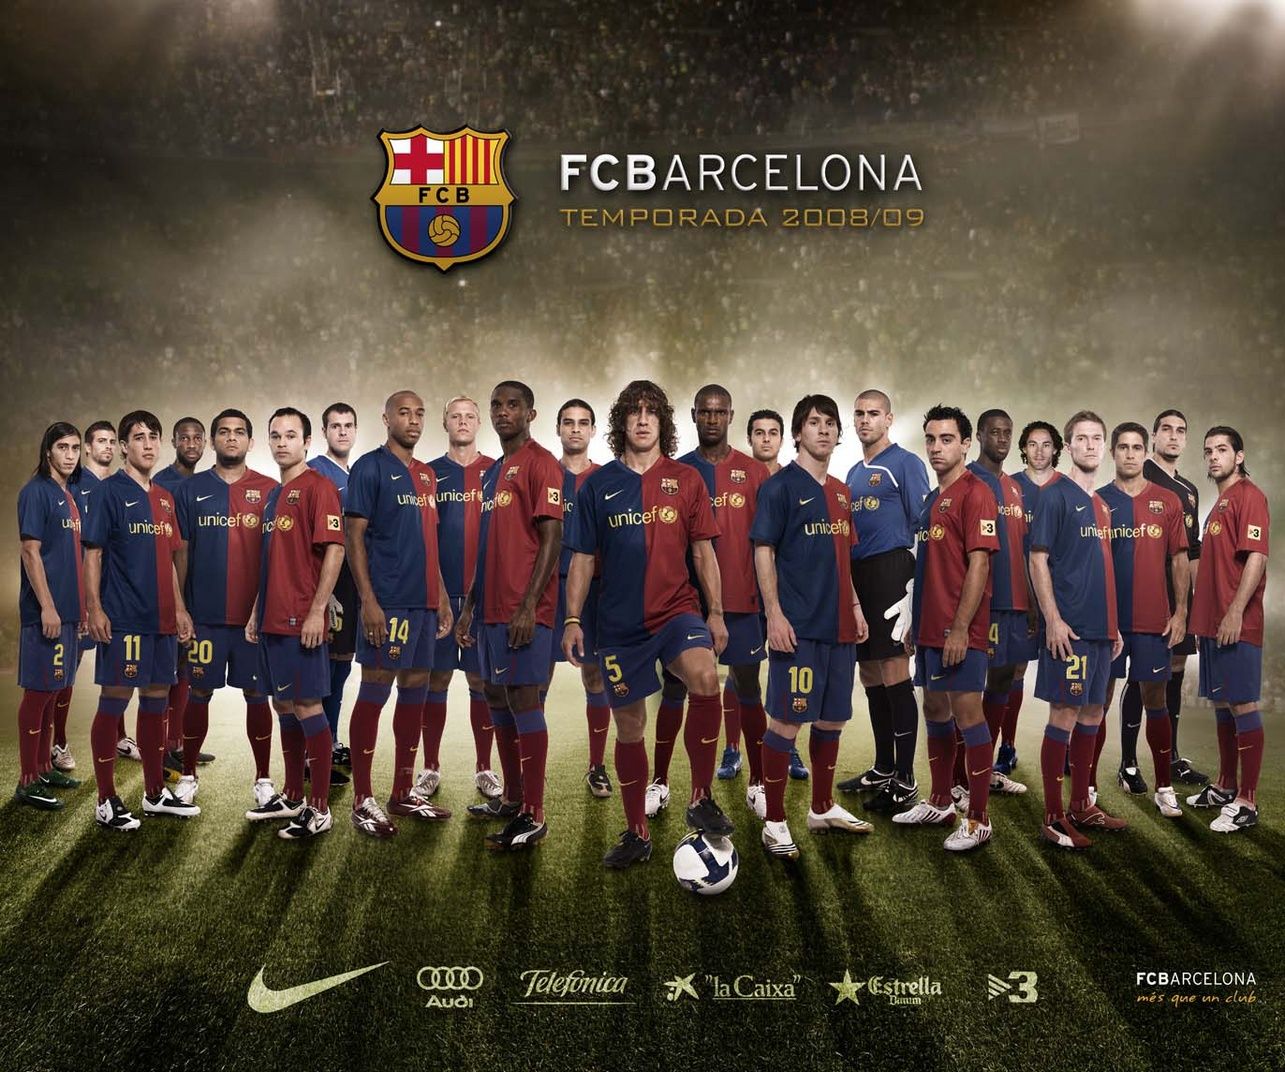 Free download SOCCER PLAYER PICTURES The best Wallpaper Barcelona